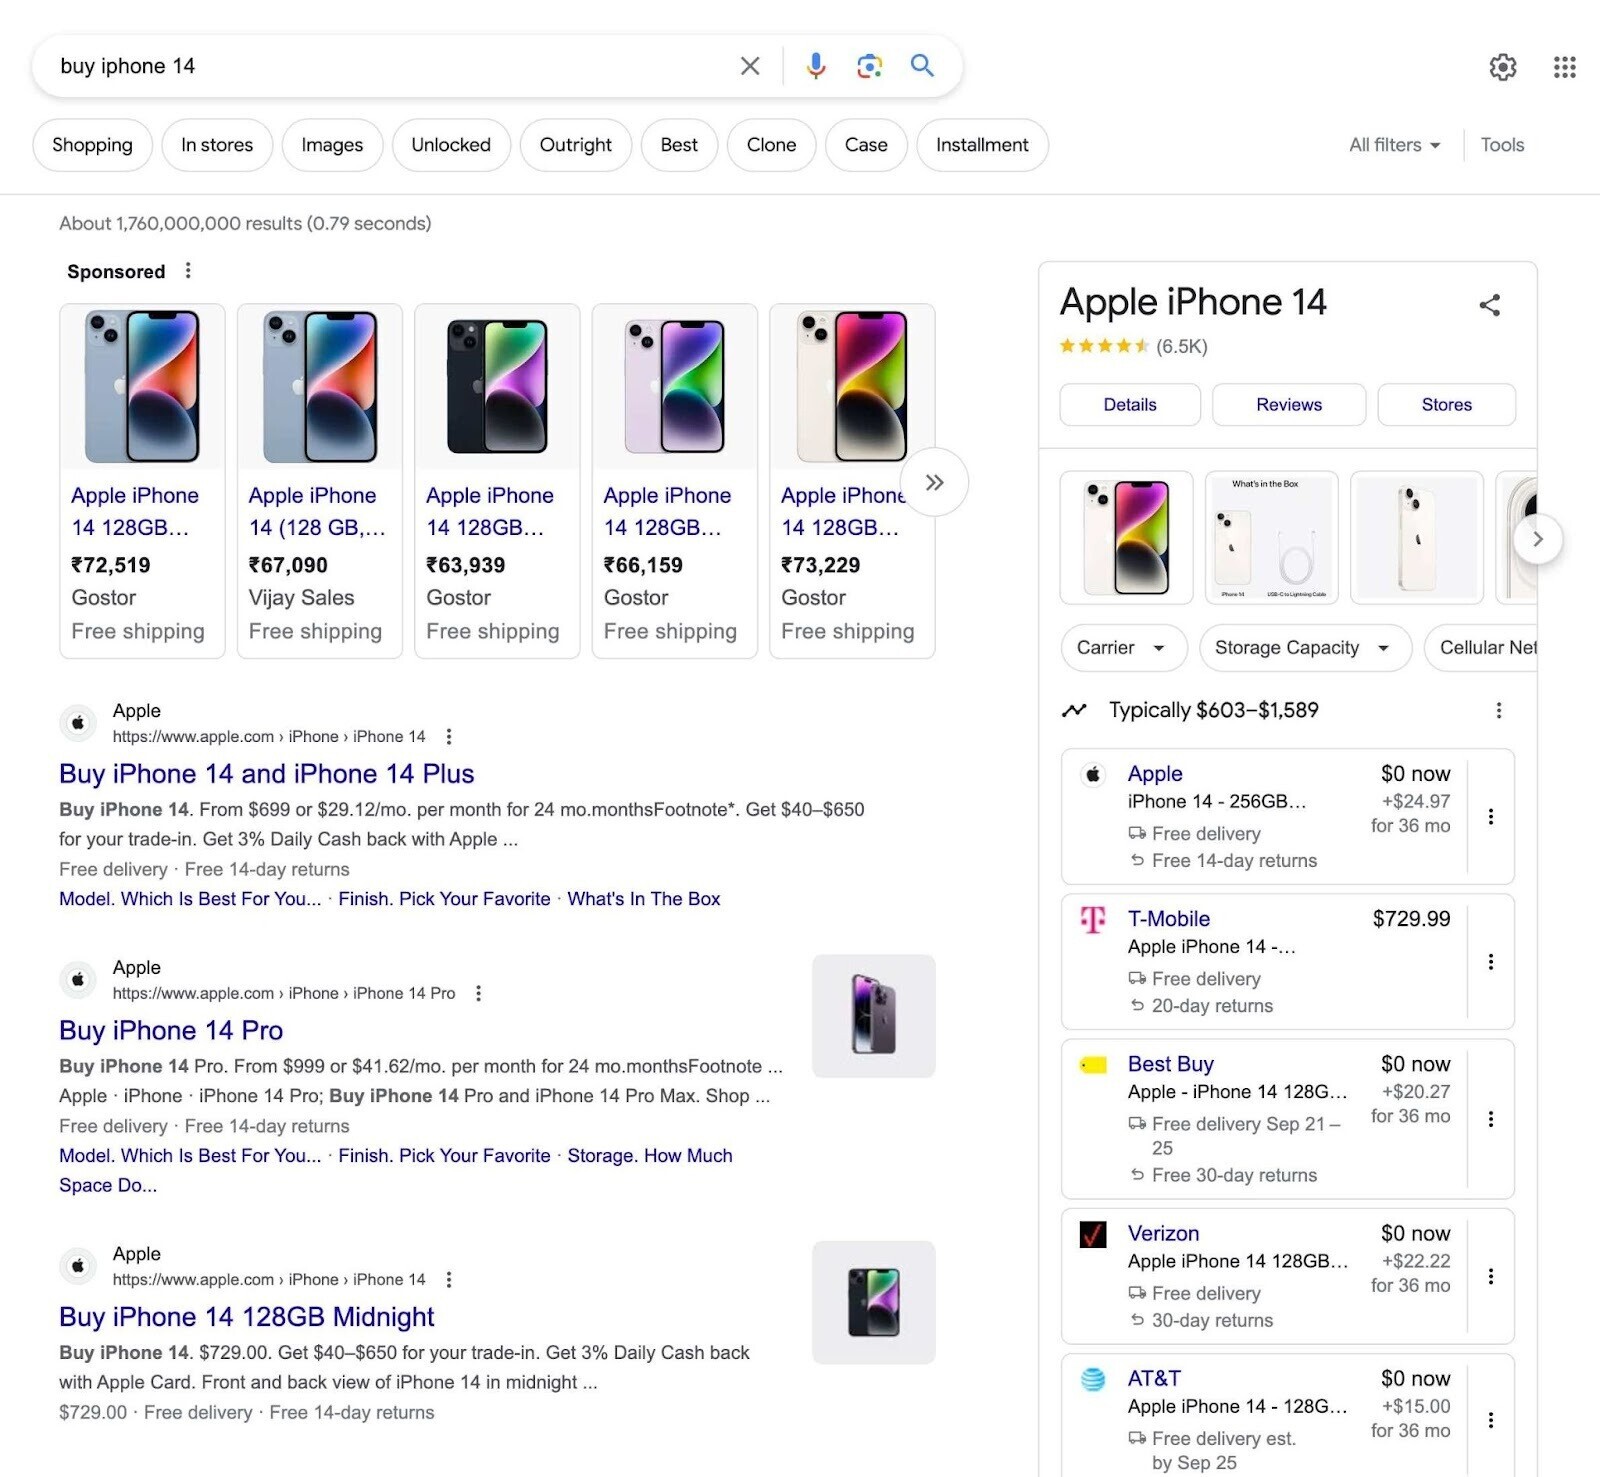 Google SERP for "buy iphone 14"